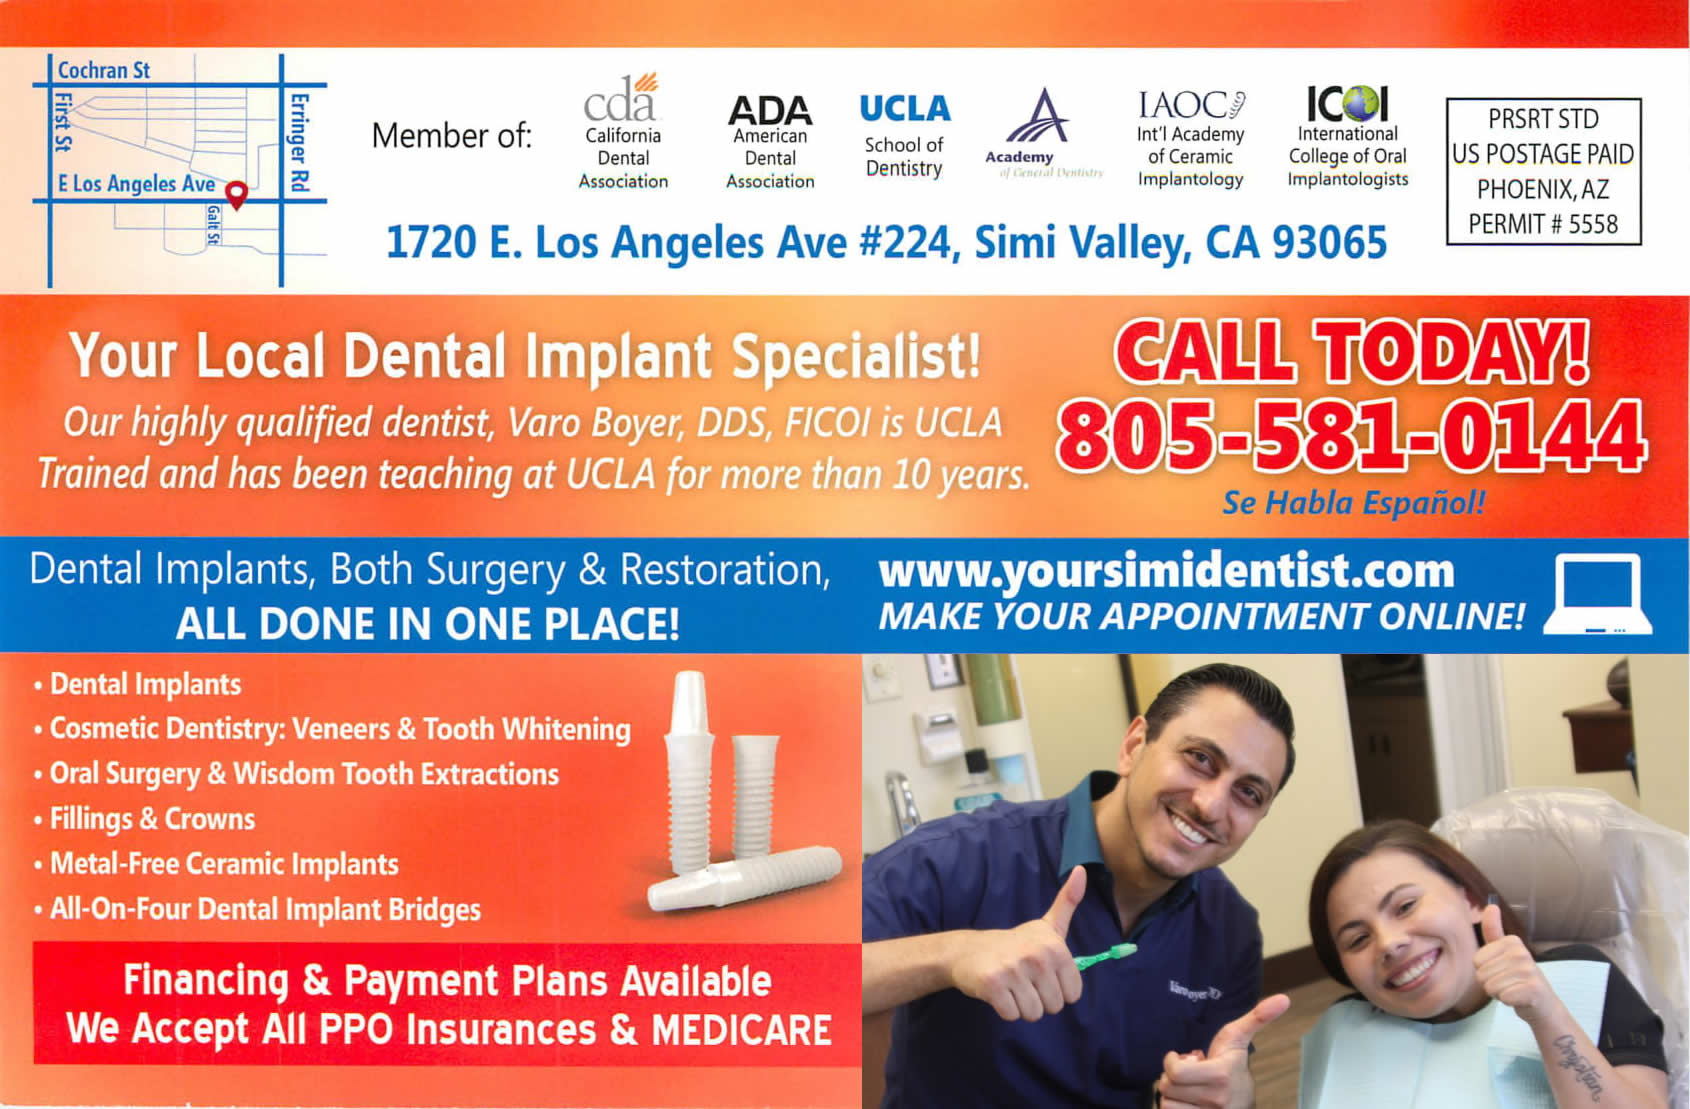 Your Local Dental Implant Specialist